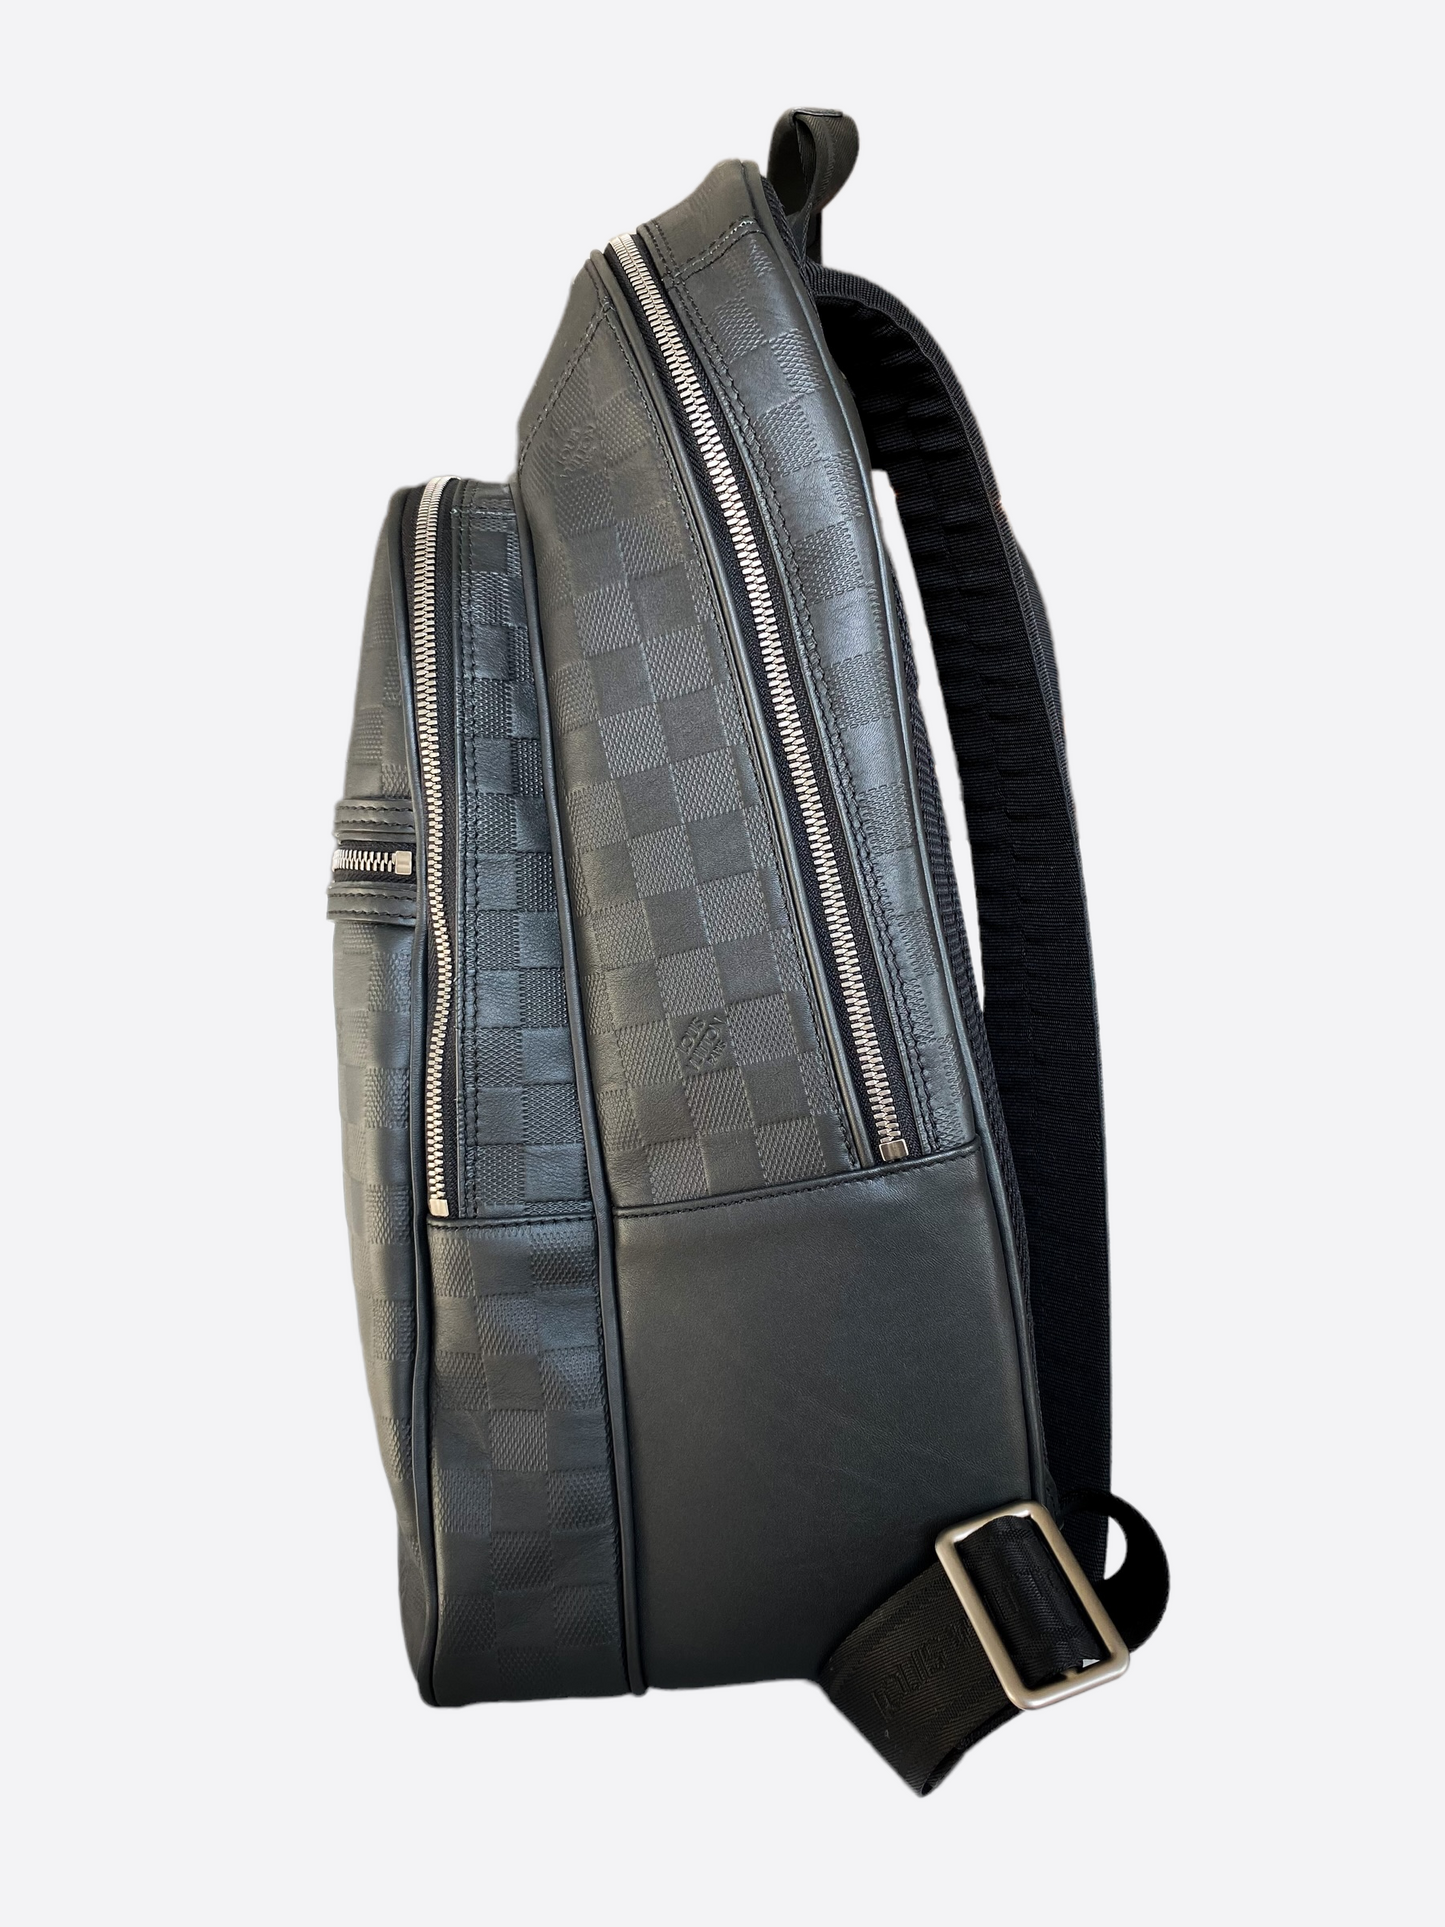 Louis Vuitton lv Michael backpack Damier infini leather